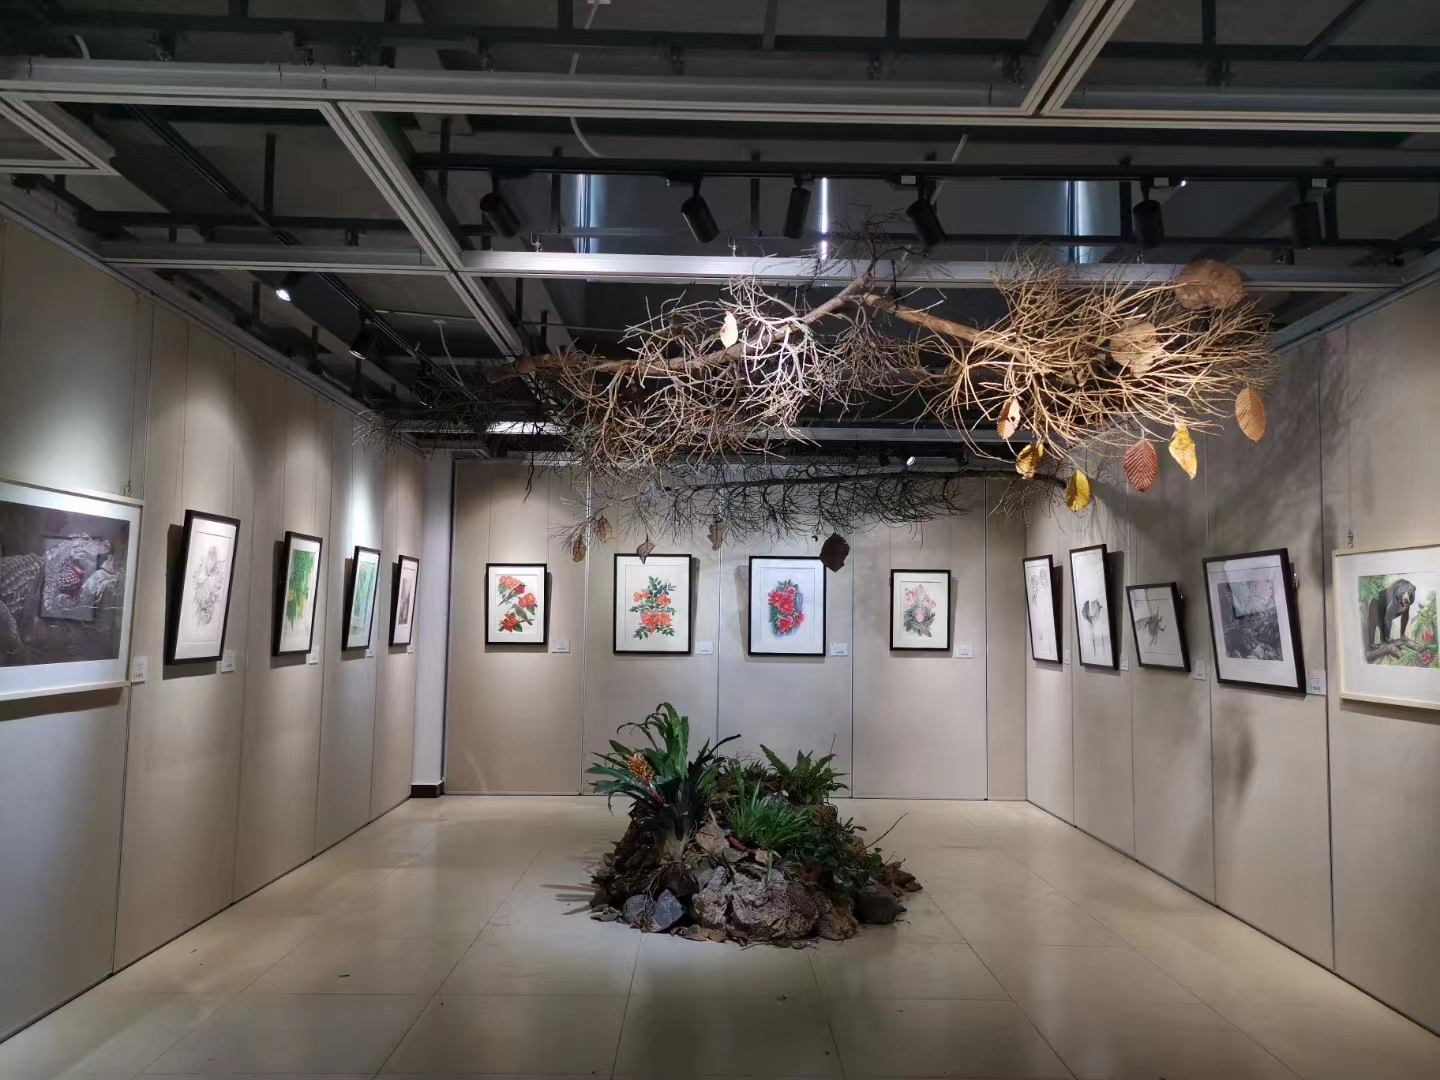 1st XTBG exhibition of natural history painting opened